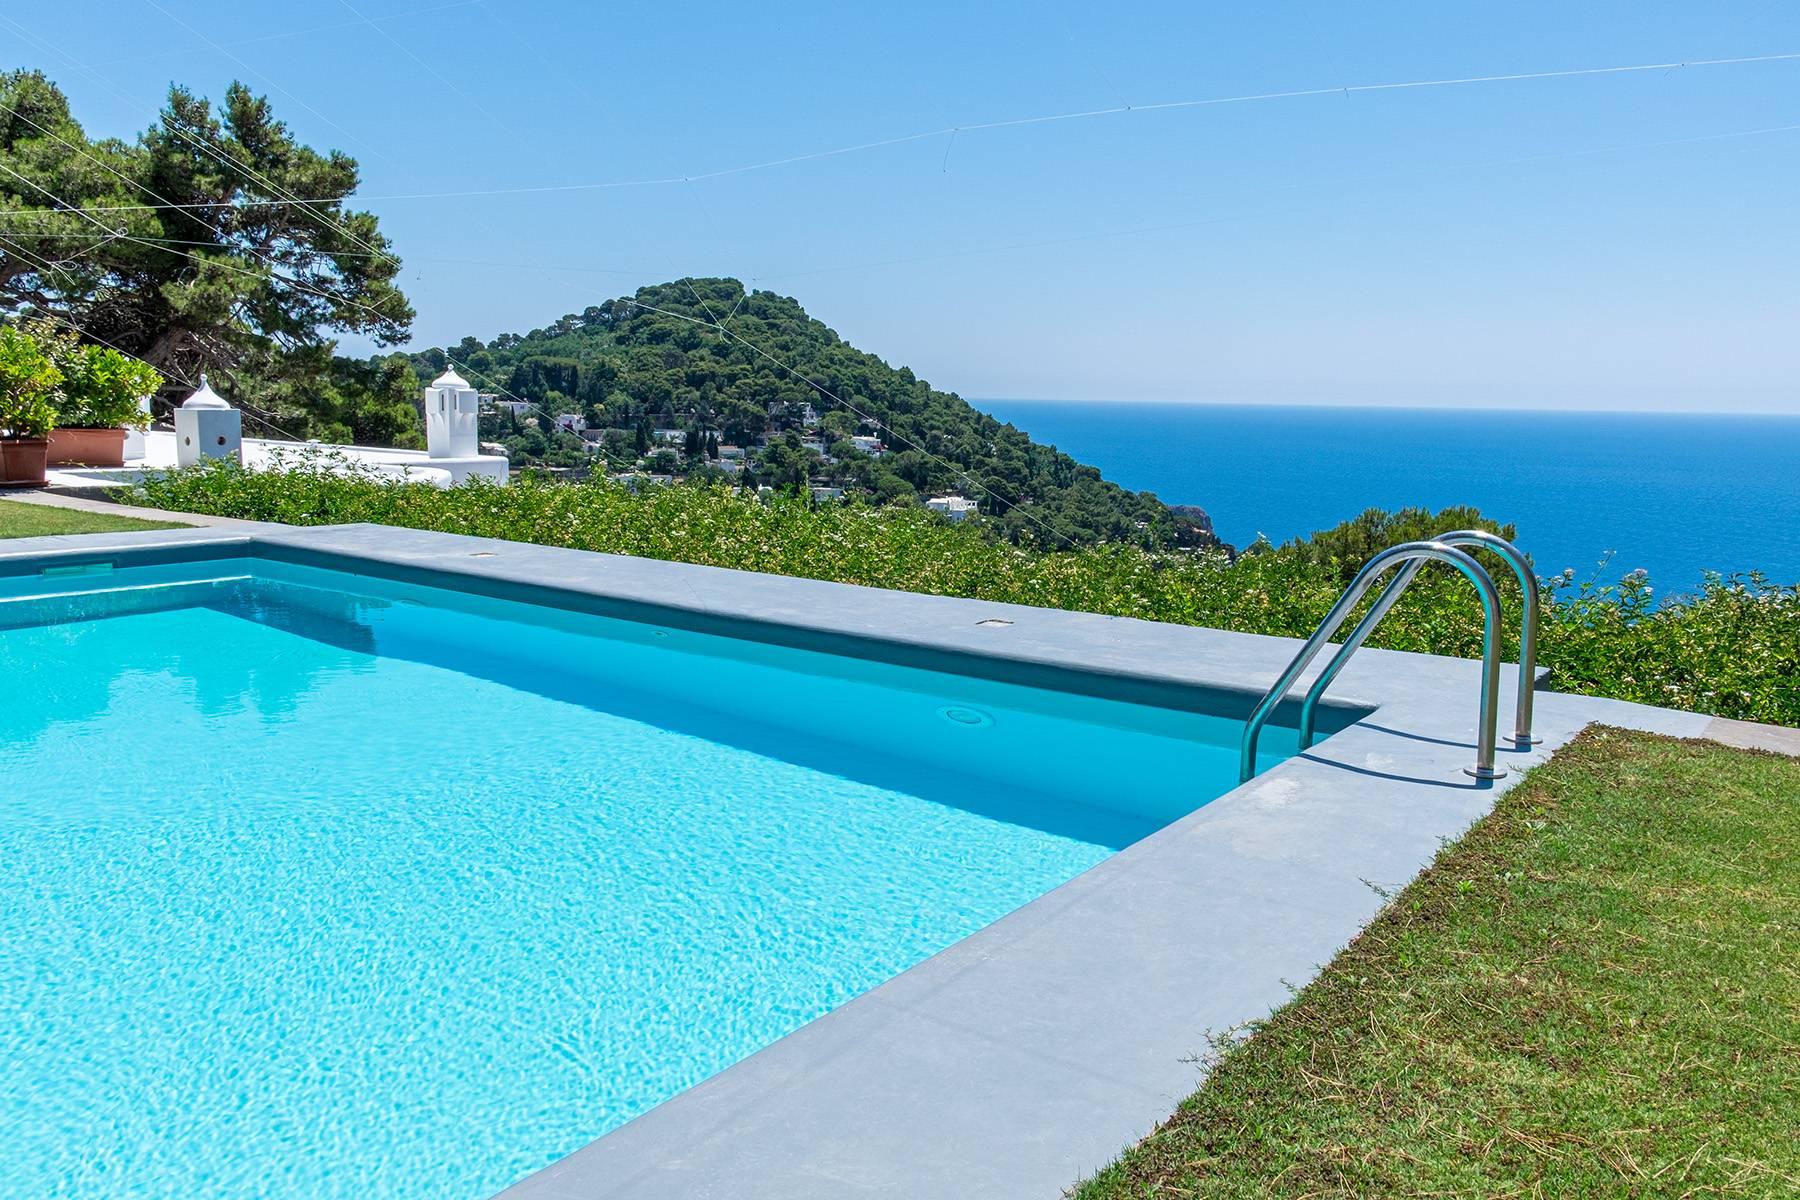 Stunning villa with swimming pool overlooking Capri and the sea - 30